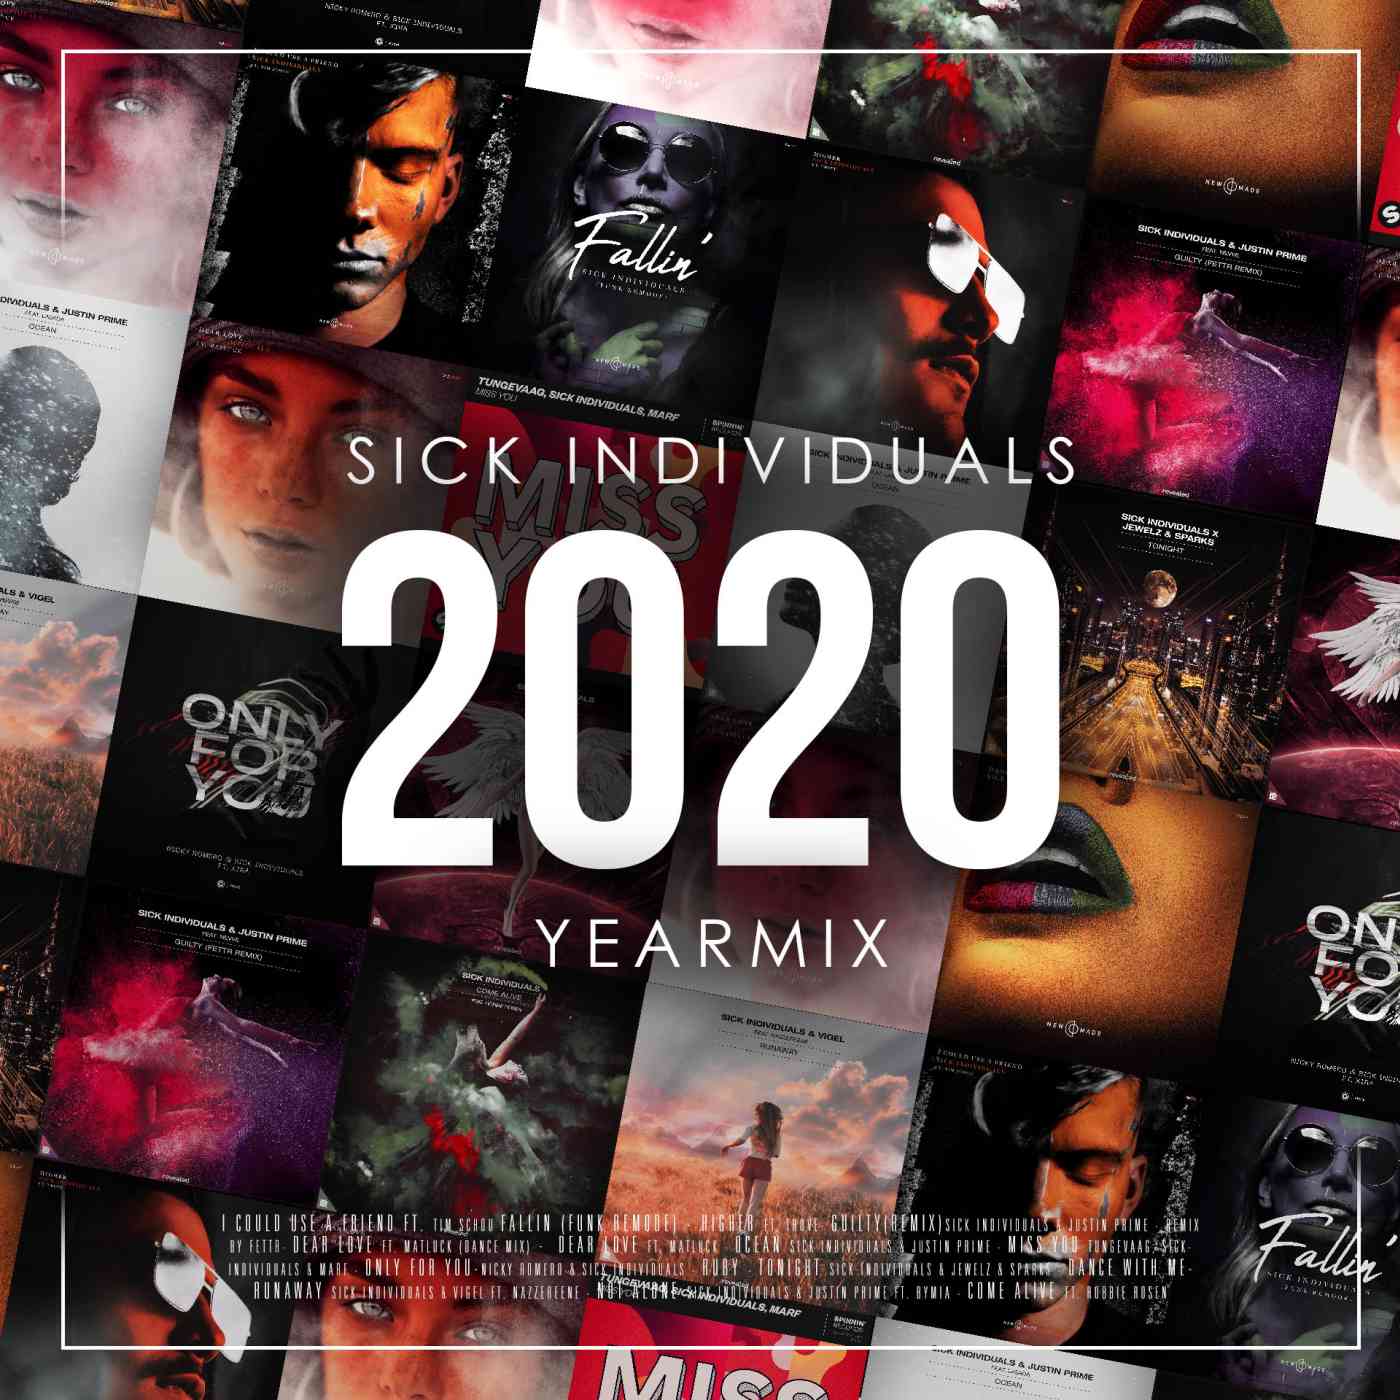 THIS IS SICK Episode 170 YEAR MIX 2020